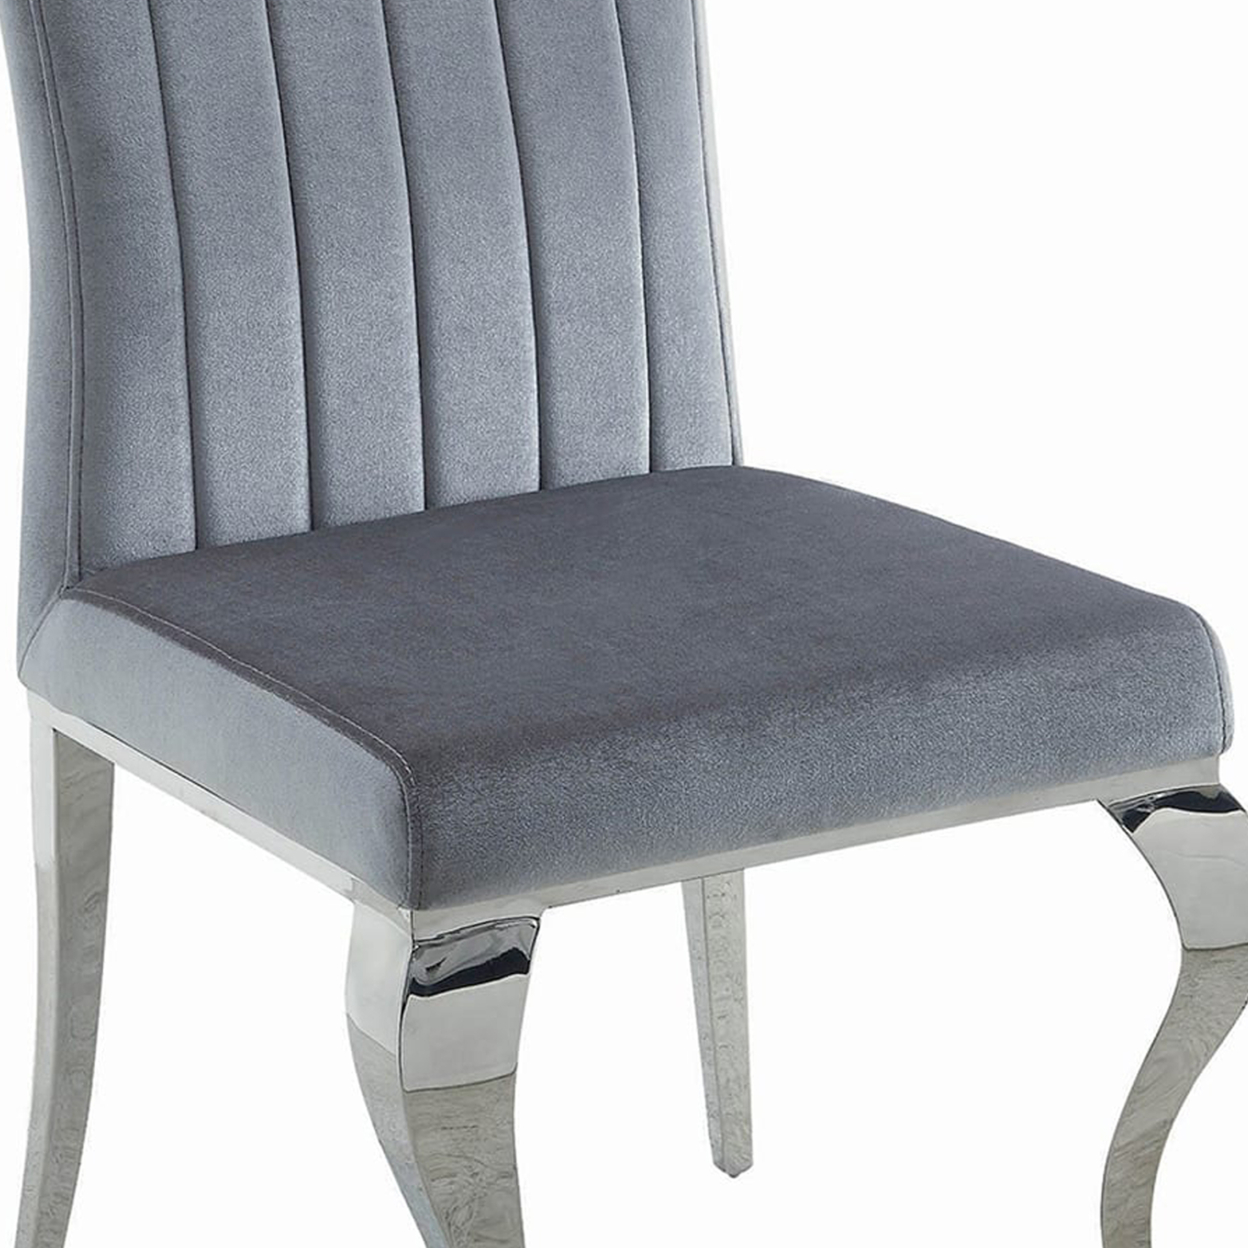 Metal Dining Chair With Cabriole Front Legs, Set Of 4, Gray And Chrome- Saltoro Sherpi